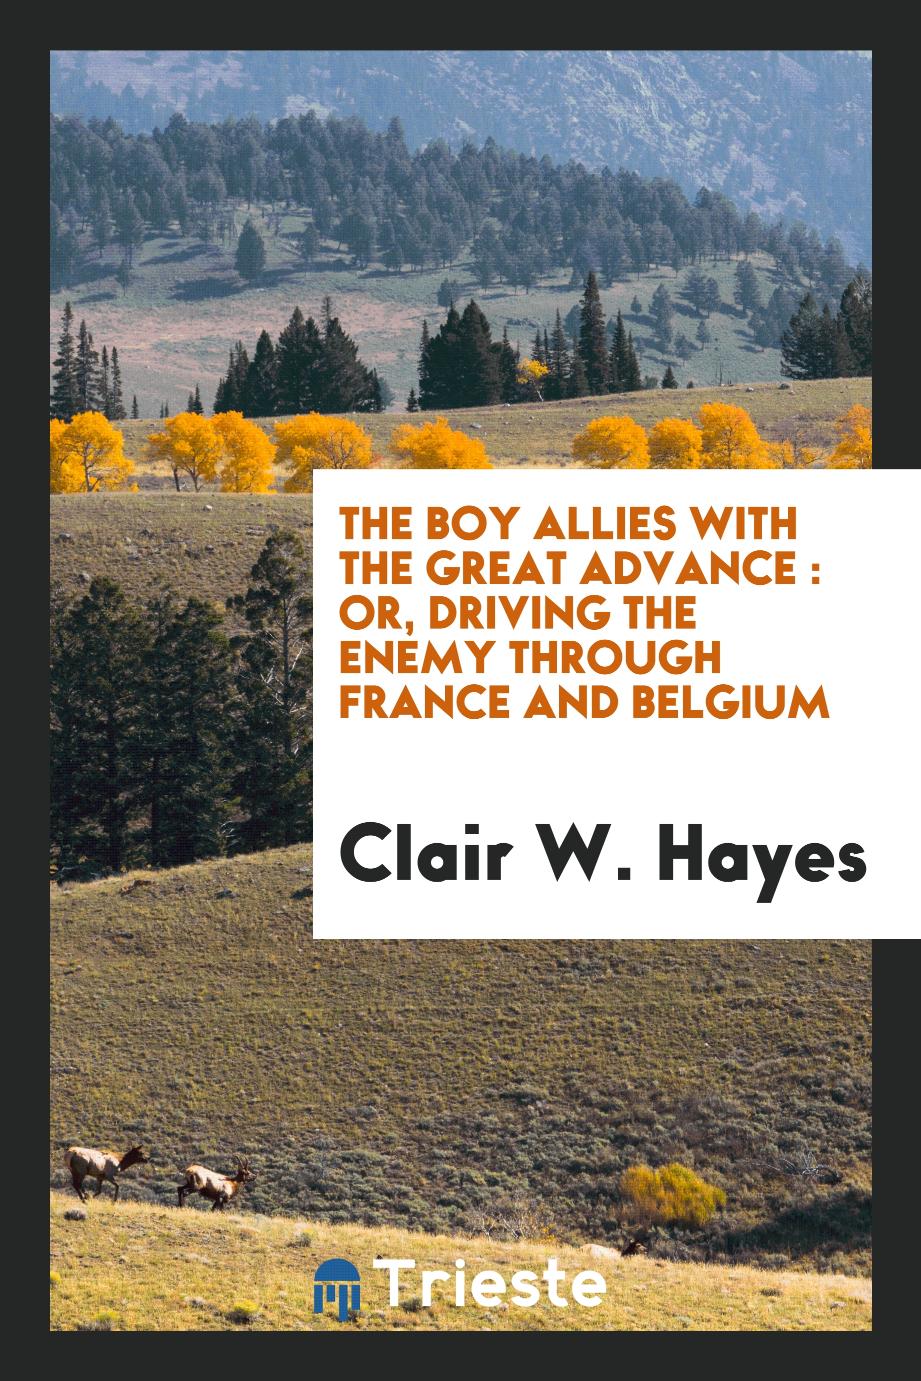 The boy allies with the great advance : or, Driving the enemy through France and Belgium